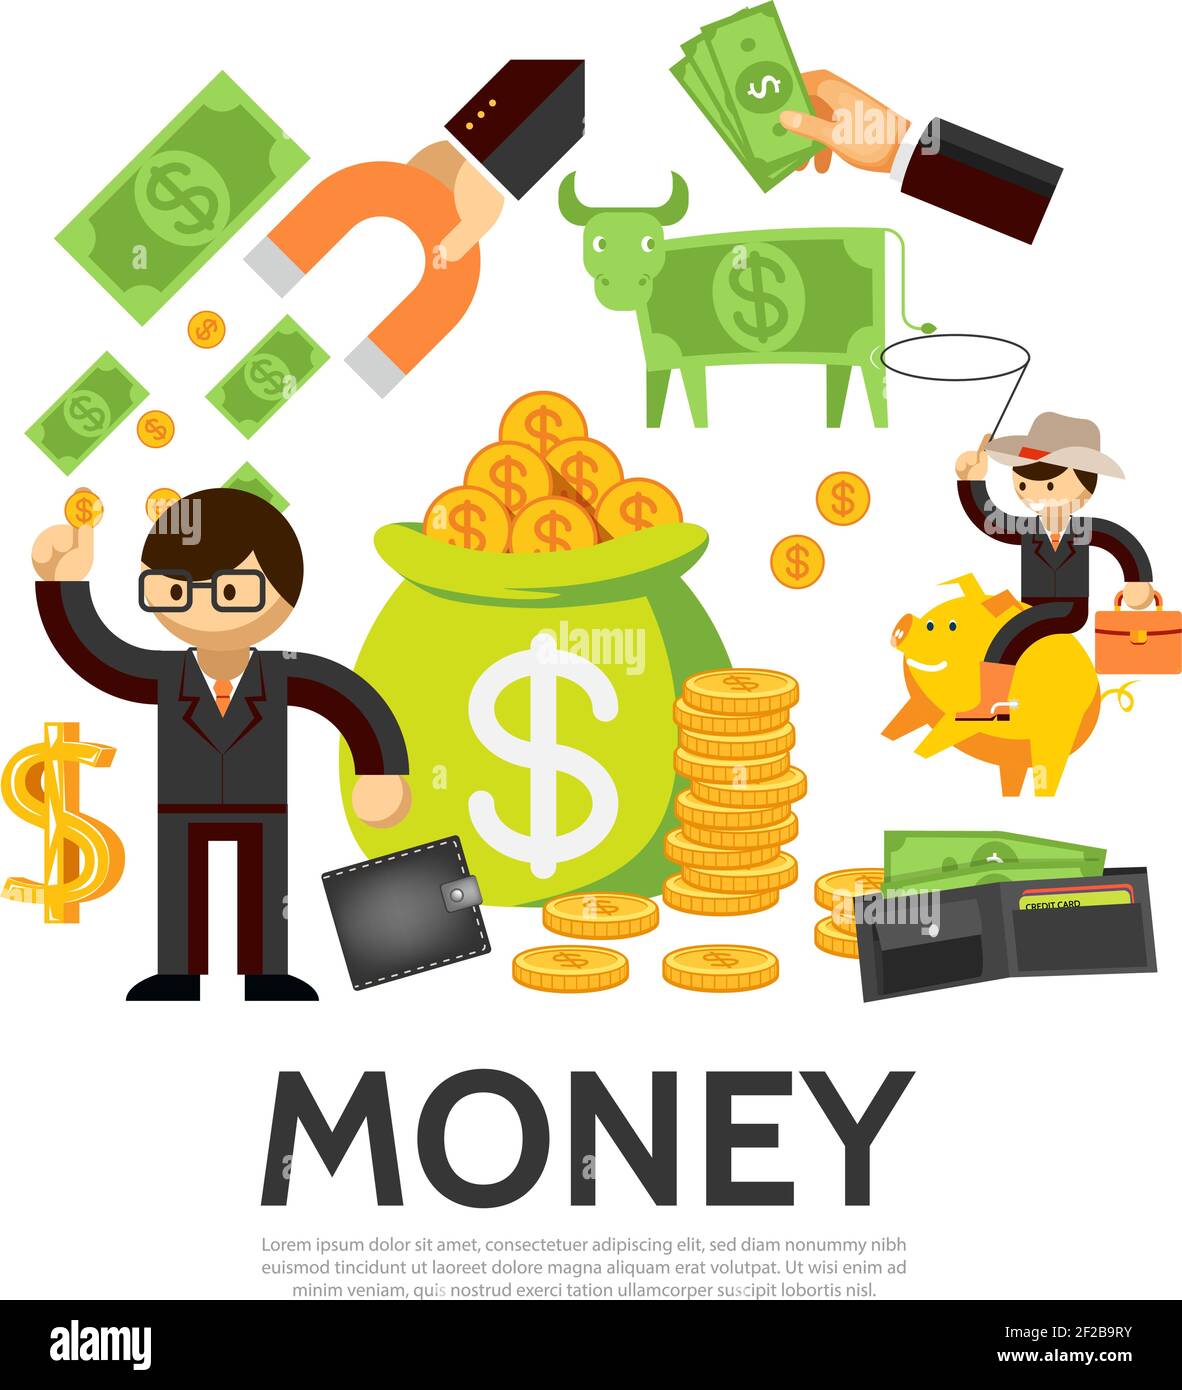 Flat finance concept with businessman cash wallet money cow bag of gold coins hand holding magnet cowboy on piggy bank isolated vector illustration Stock Vector